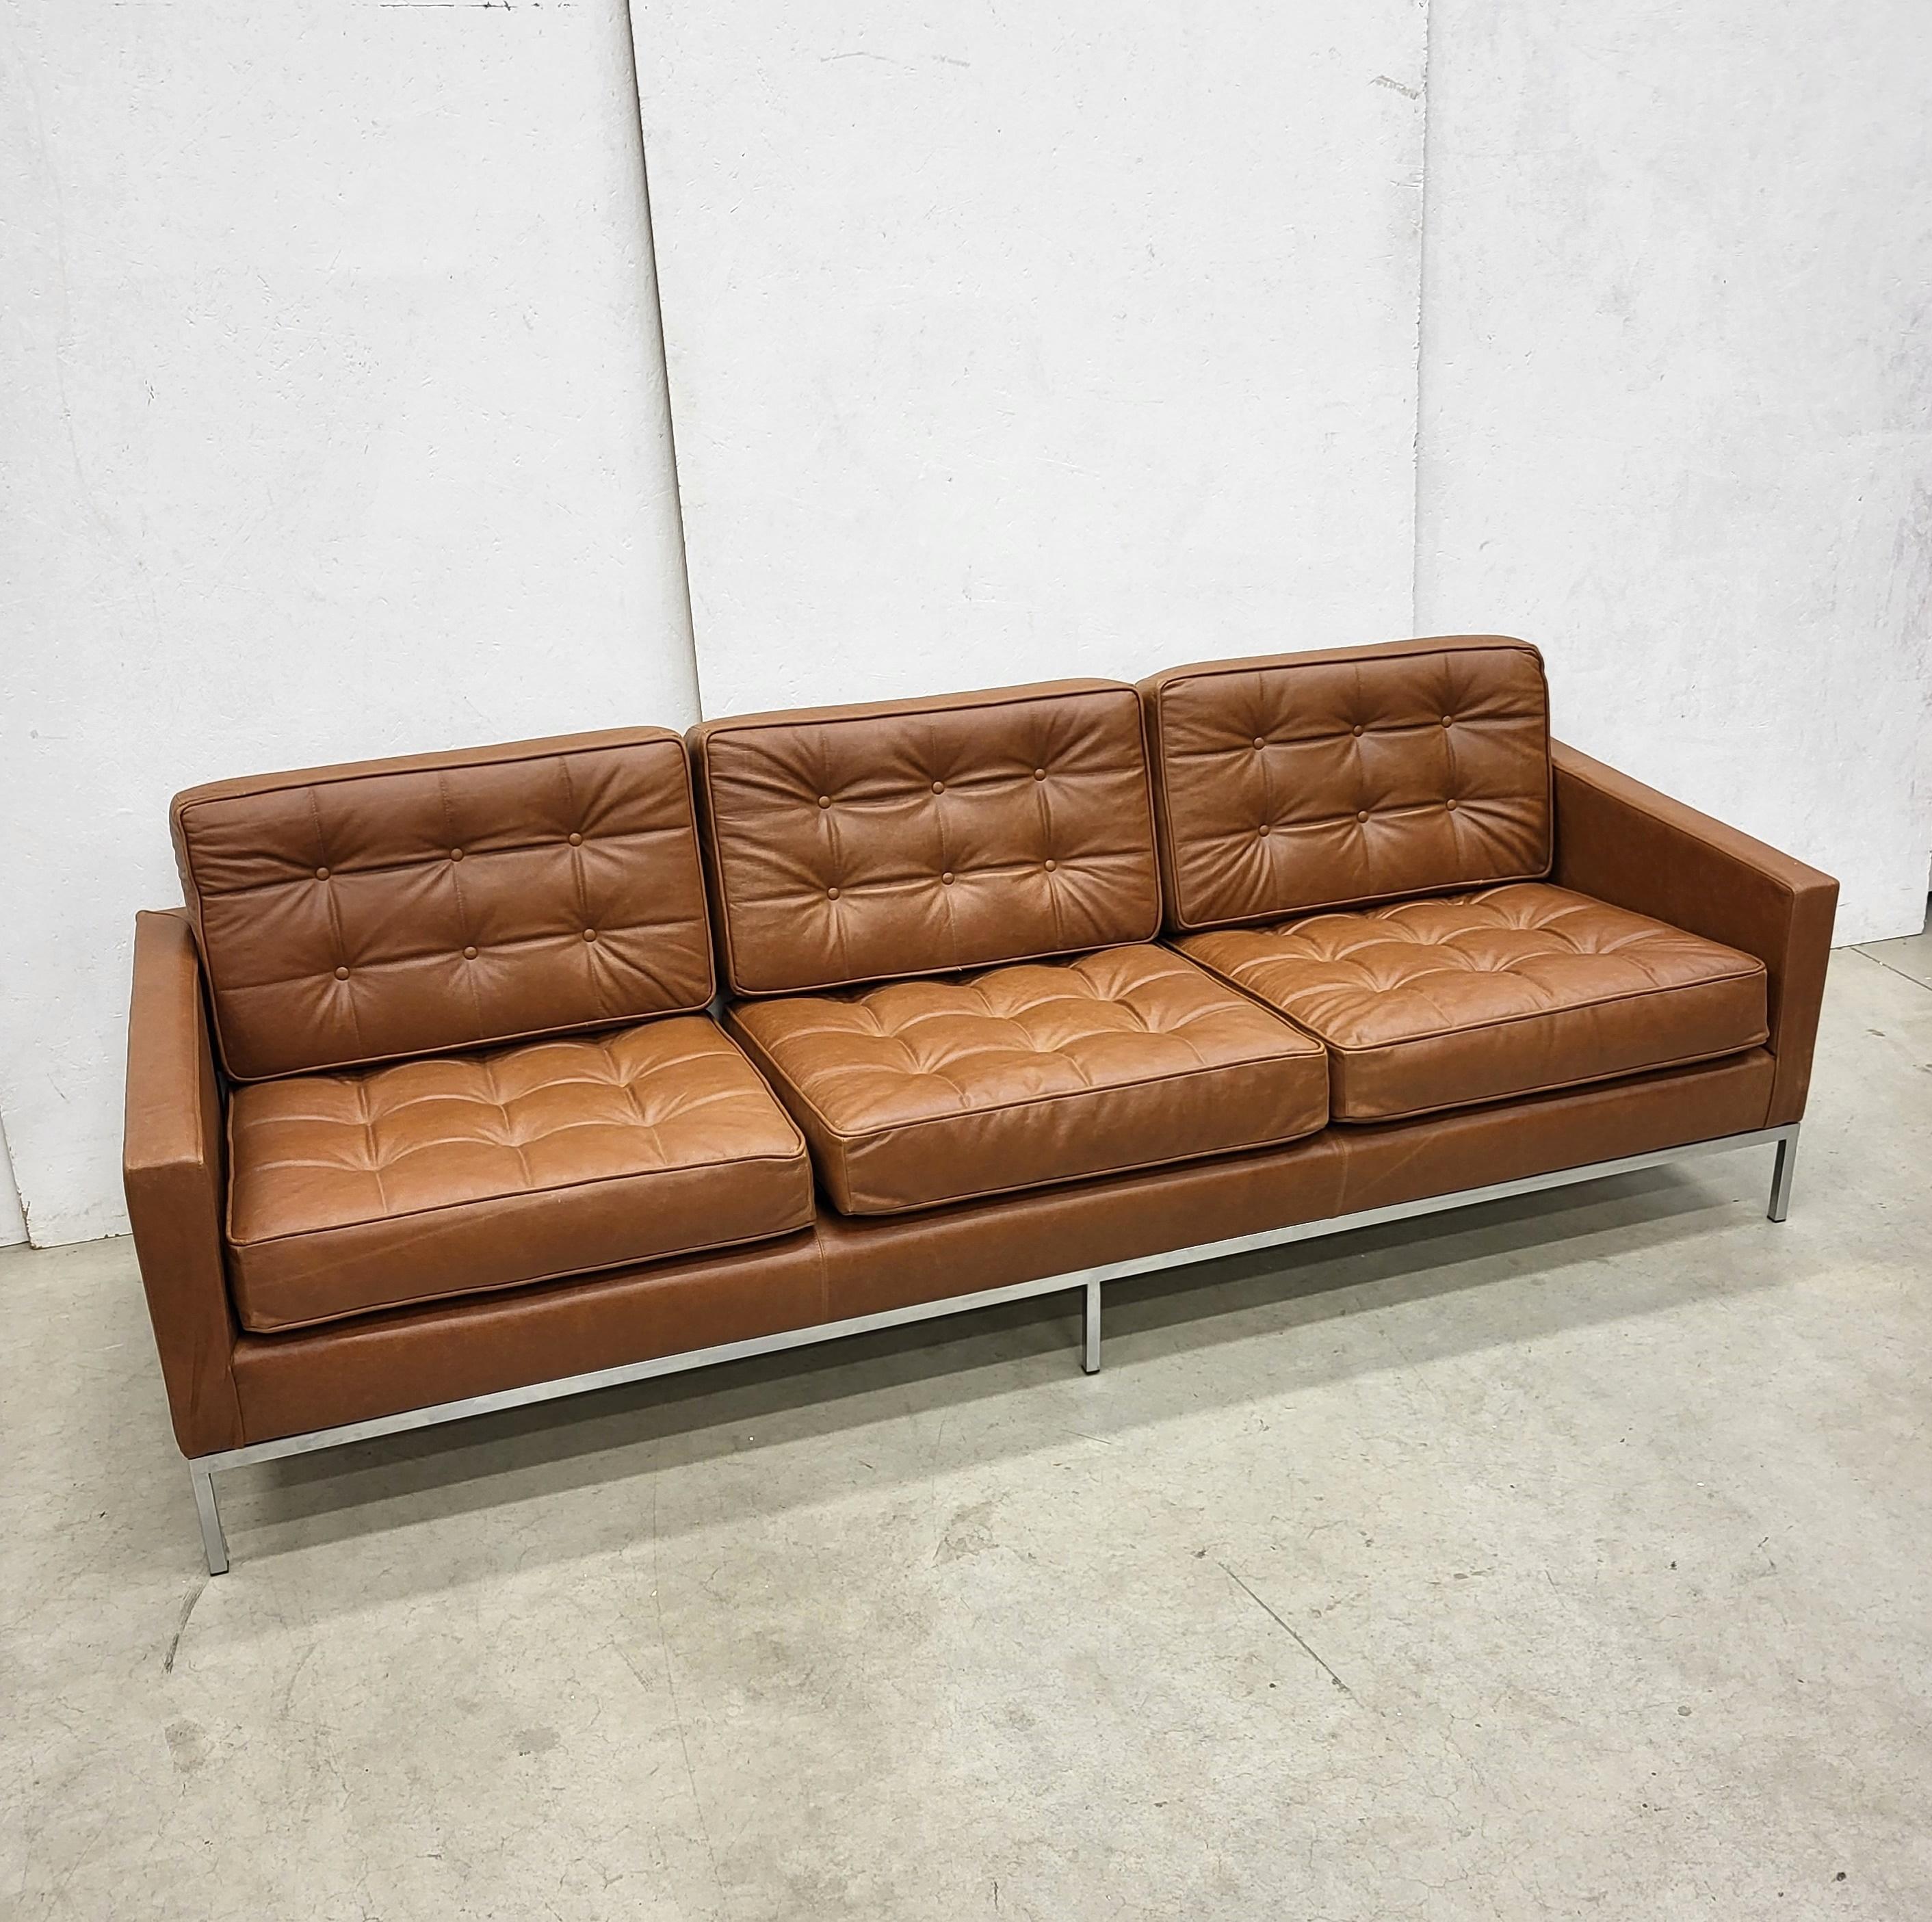 This timeless iconic sofa was designed in 1954 by Florence Knoll and produced by Knoll in the 1970s. 

The sofa is upholstered in an amazing Mid Brown Cognac leatherand has been restored completely. 
Overall it is in mint condition.

The sofa